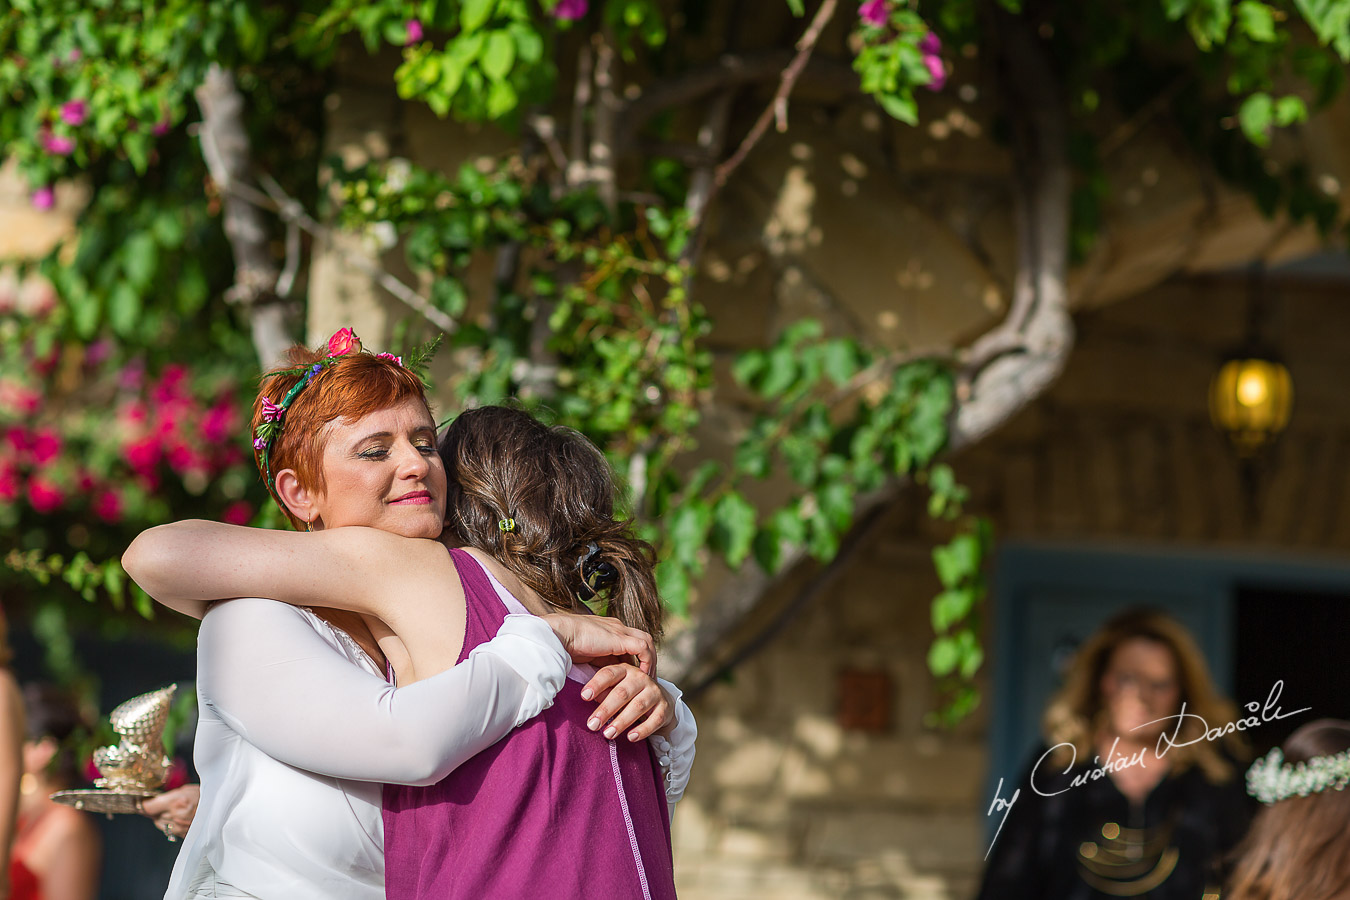 Storytelling wedding photography image captured in Tochni Village in Larnaca district of Cyprus by wedding Photographer Cristian Dascalu